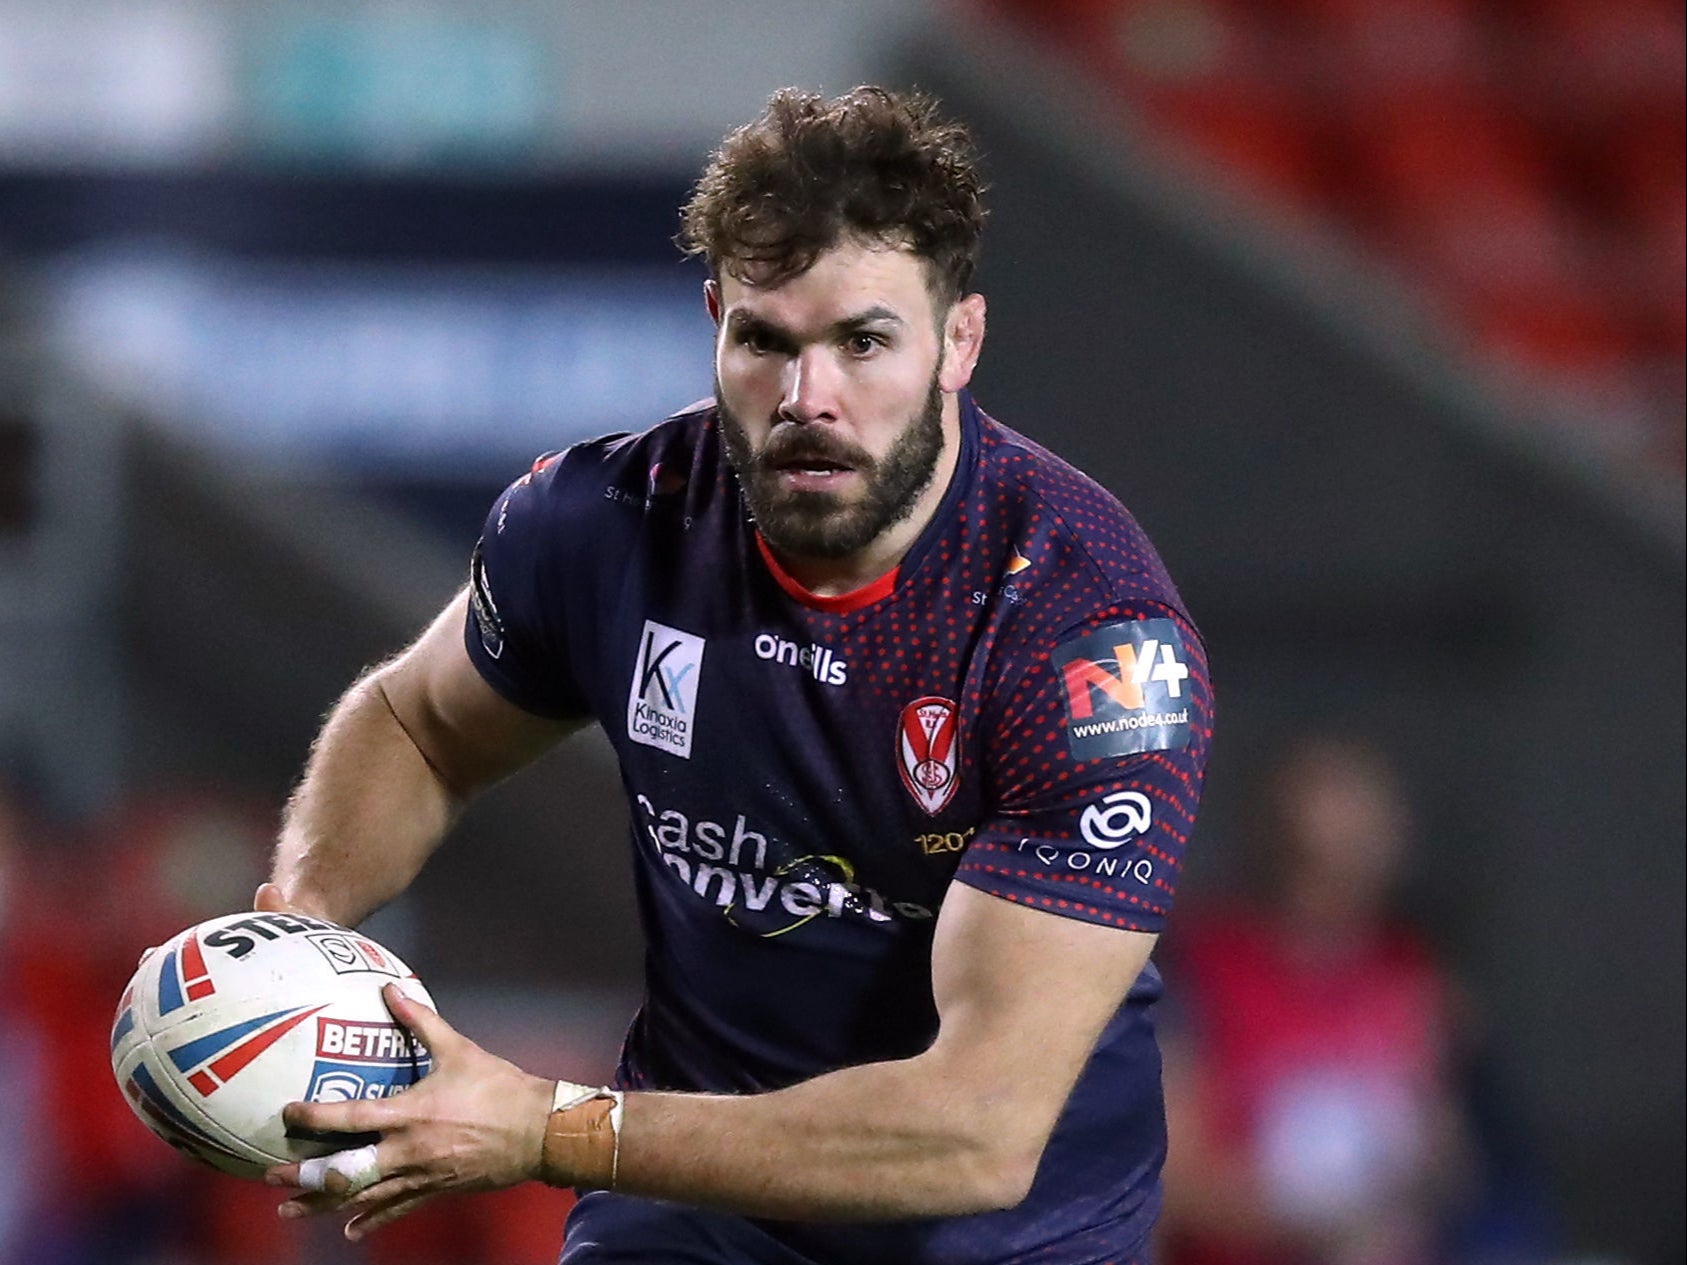 Walmsley sustained the injury in St Helens’ defeat at Wigan at the end of last month